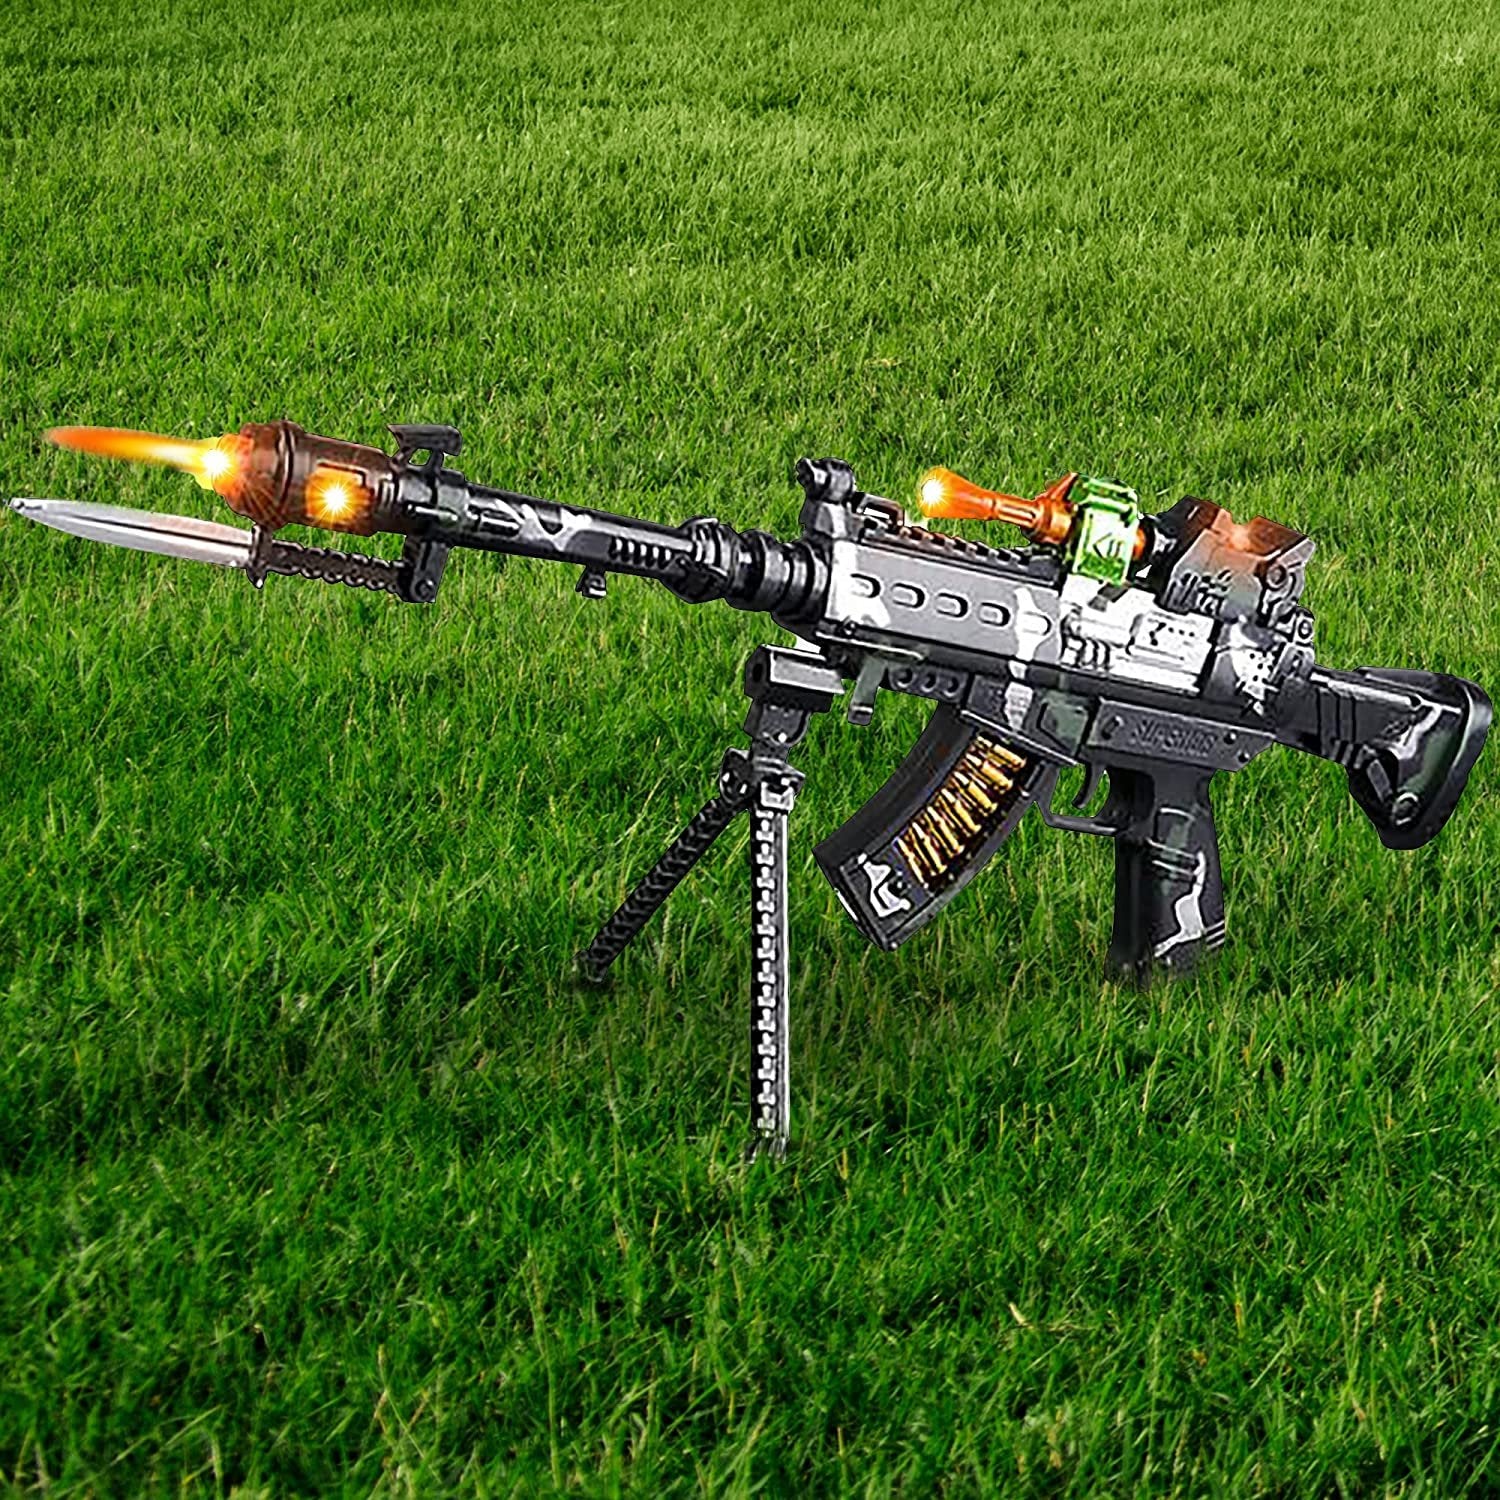 ArtCreativity Special Forces Toy Machine Gun with LEDs, Sound & Bayonet | 22” Kids’ Light Up Military Assault Rifle | Cool Stand & Shoulder Strap | Batteries Included | Great Gift for Boys and Girls